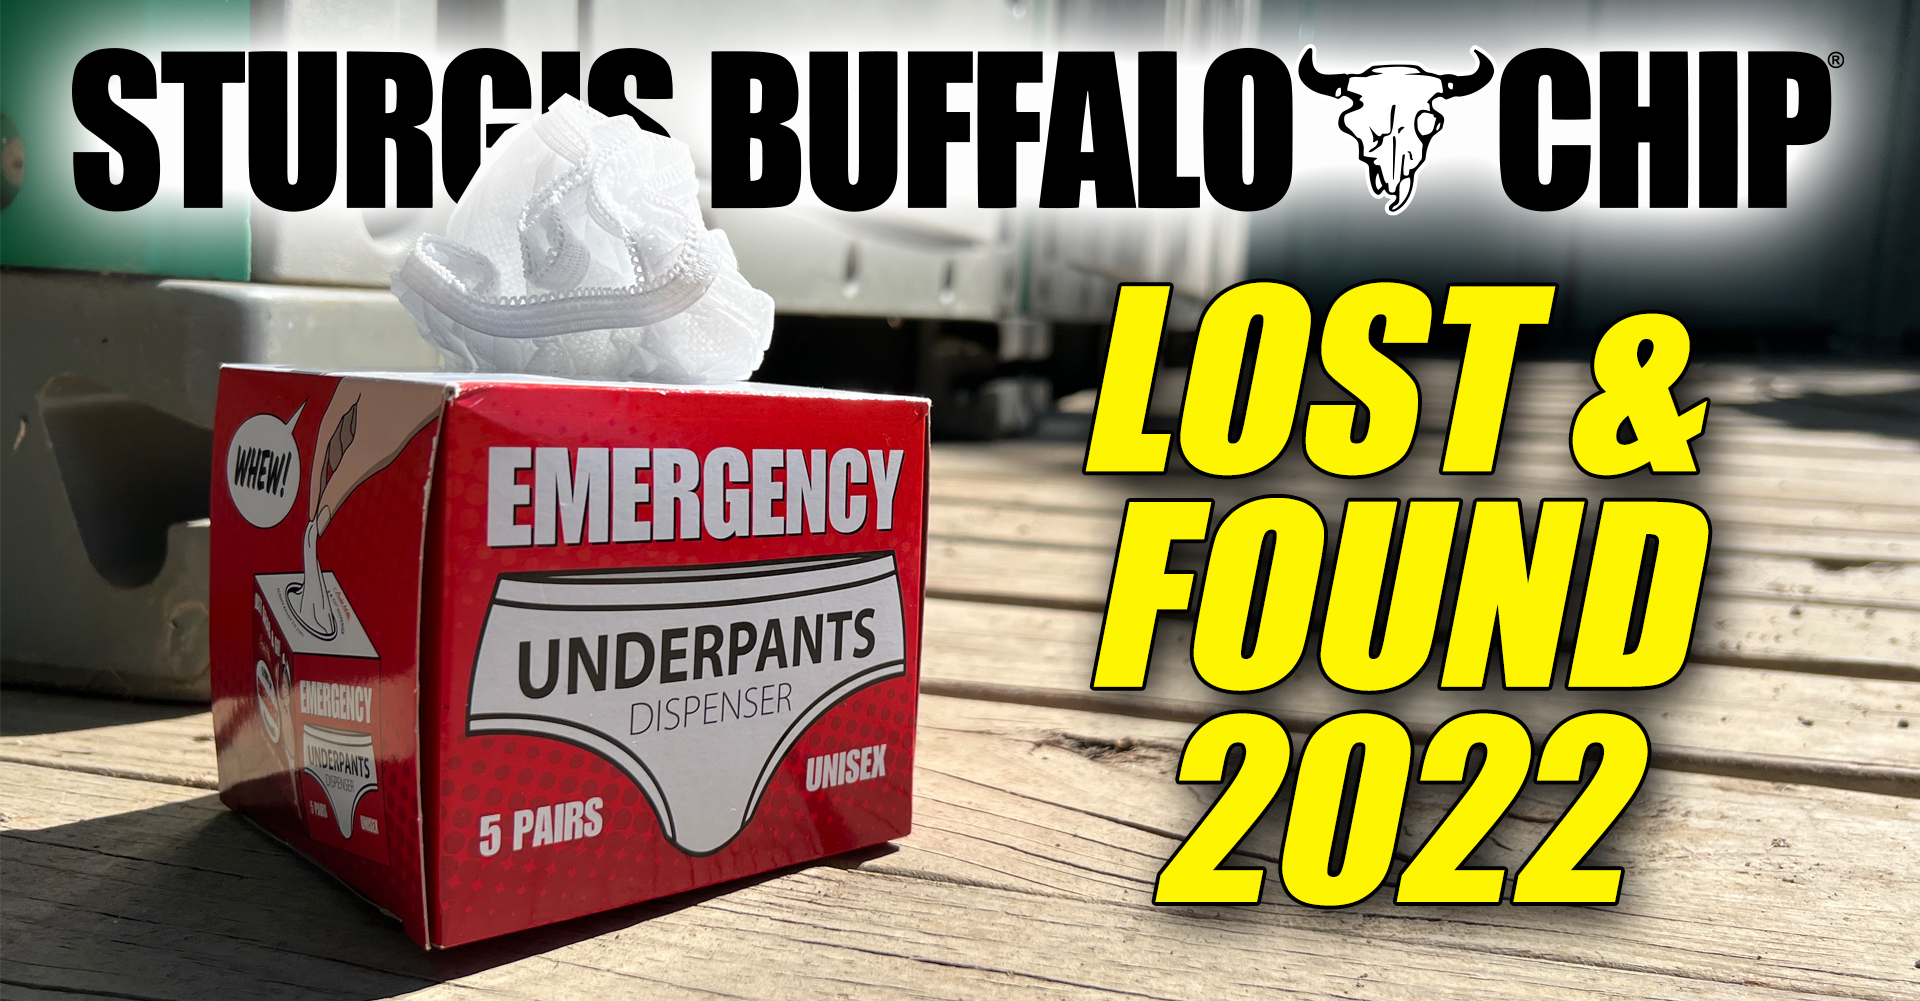 The Aftermath of the Weirdest Party Anywhere: The 2022 Sturgis Buffalo®  Chip Lost & Found - Legendary Sturgis Buffalo Chip